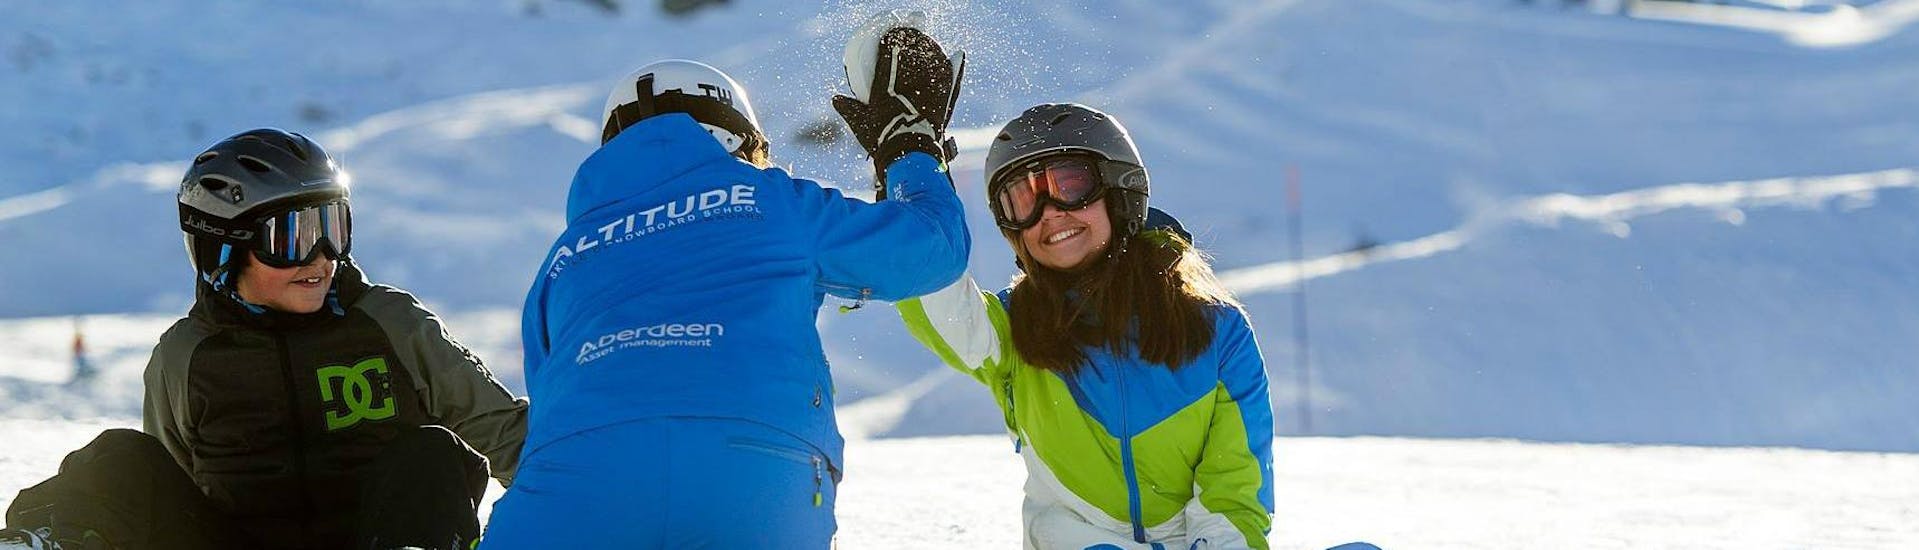 A snowboard instructor is high-fiving her student during the Private Snowboarding Lessons for Kids & Adults - All Levels with Altitude Ski School Zermatt.